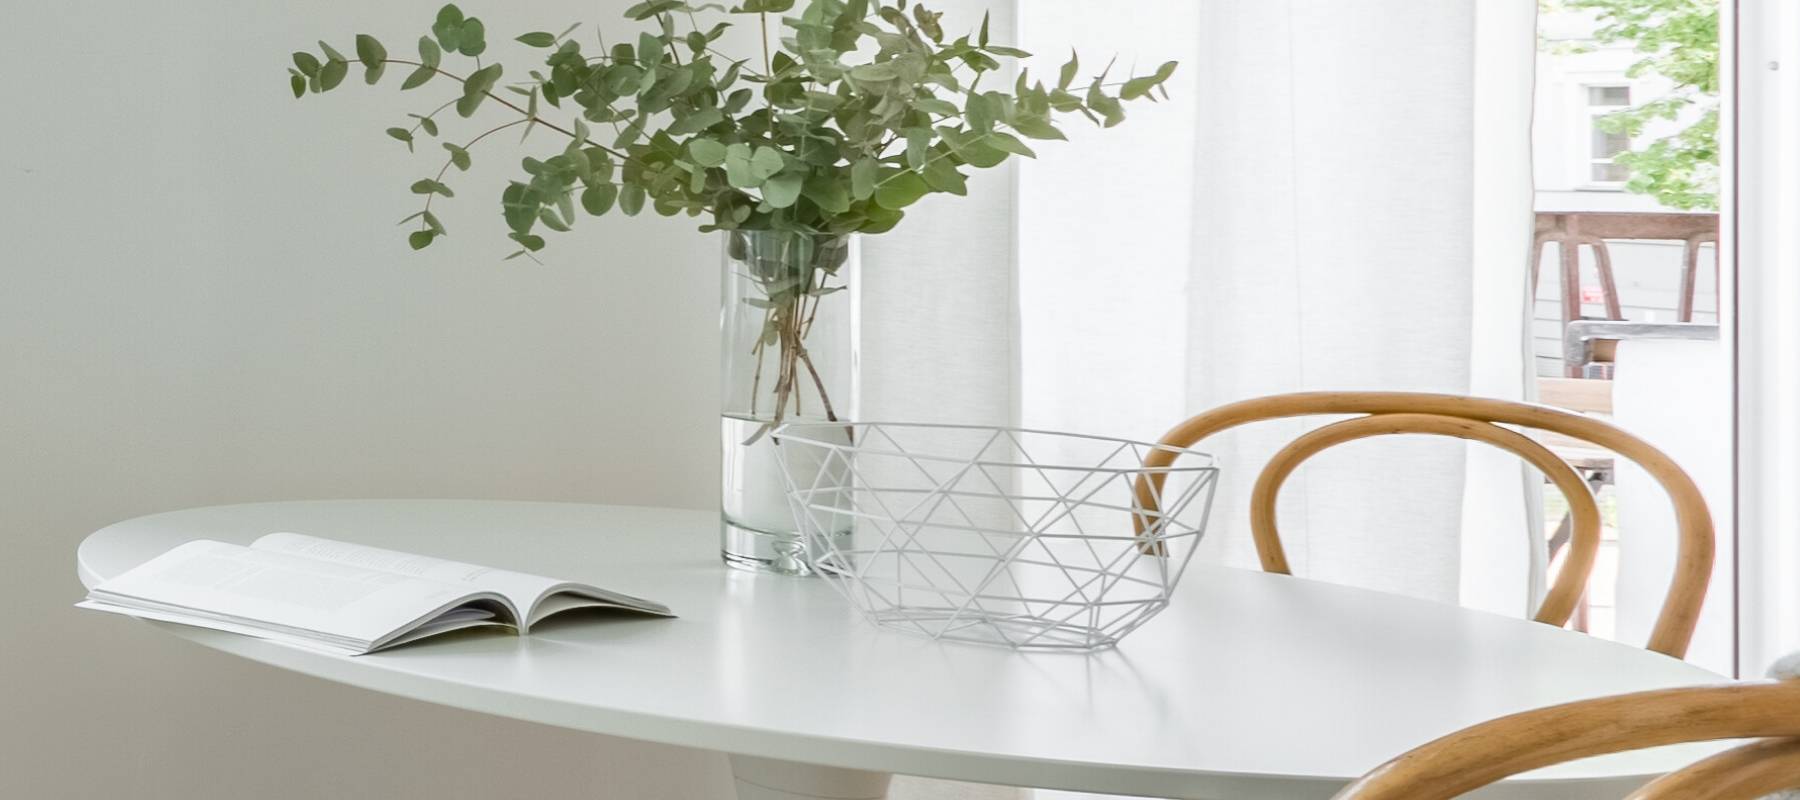 White oval table with green plant